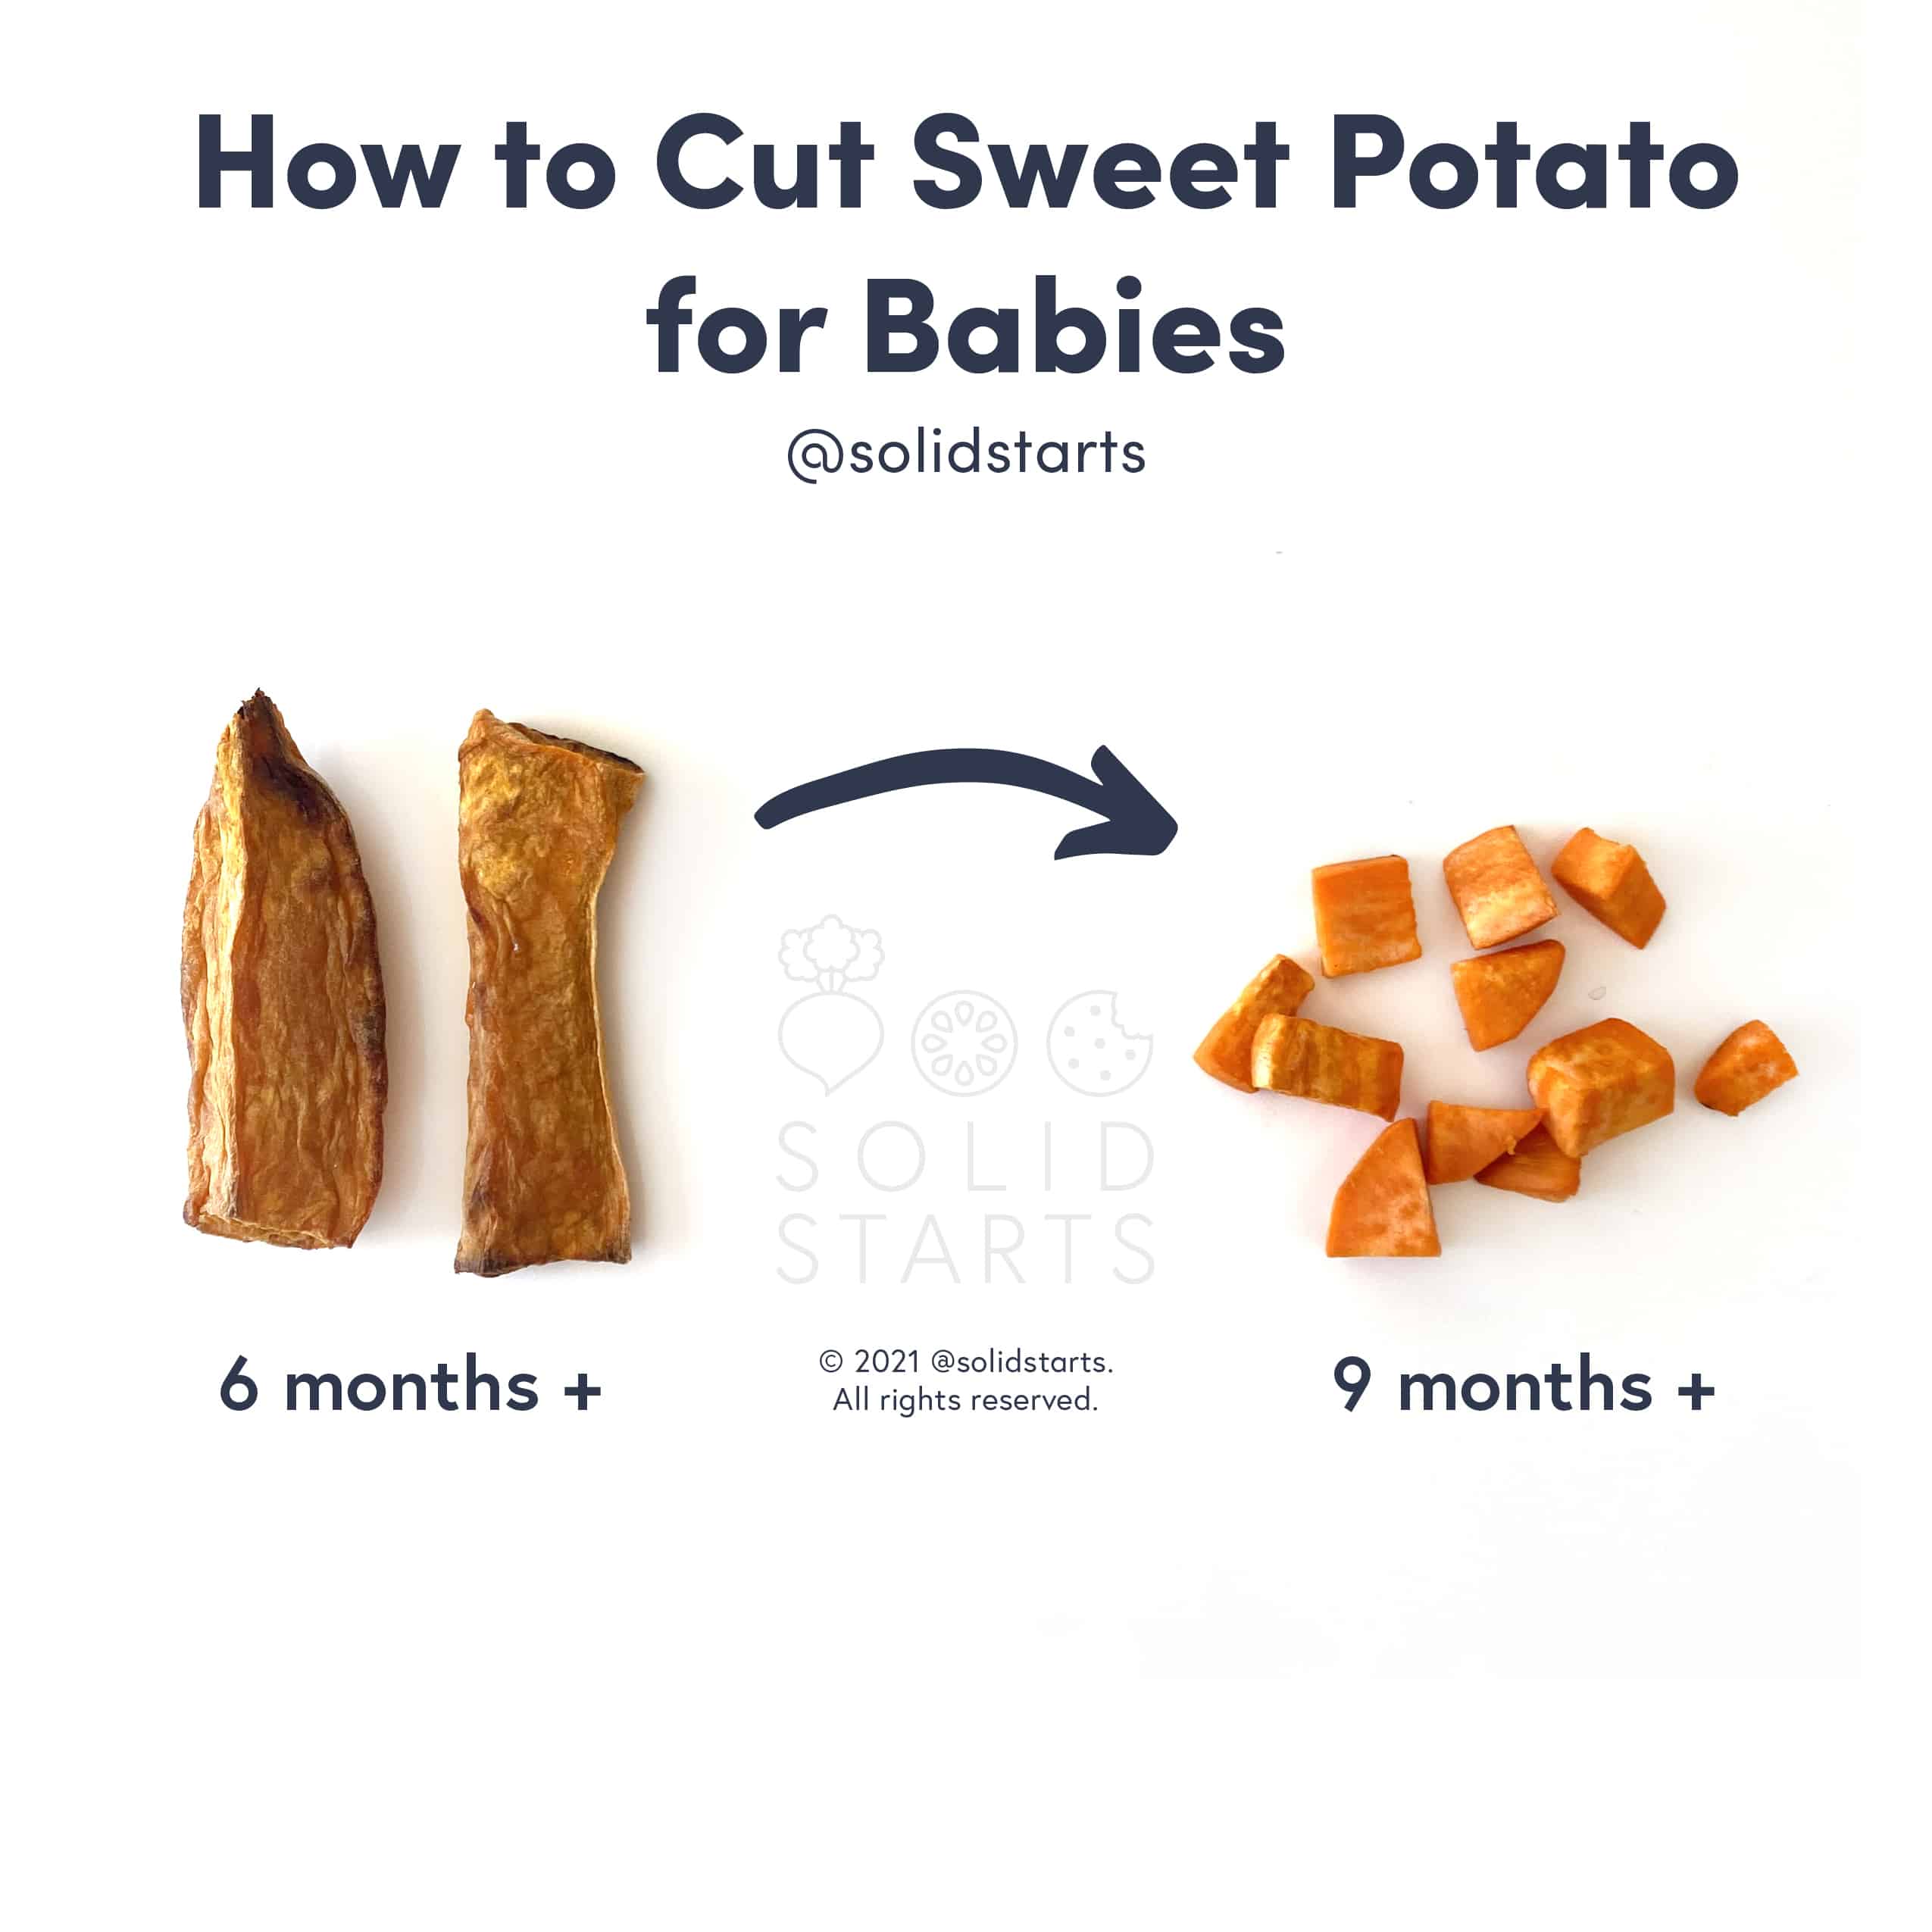 How to Cut Sweet Potato for Babies